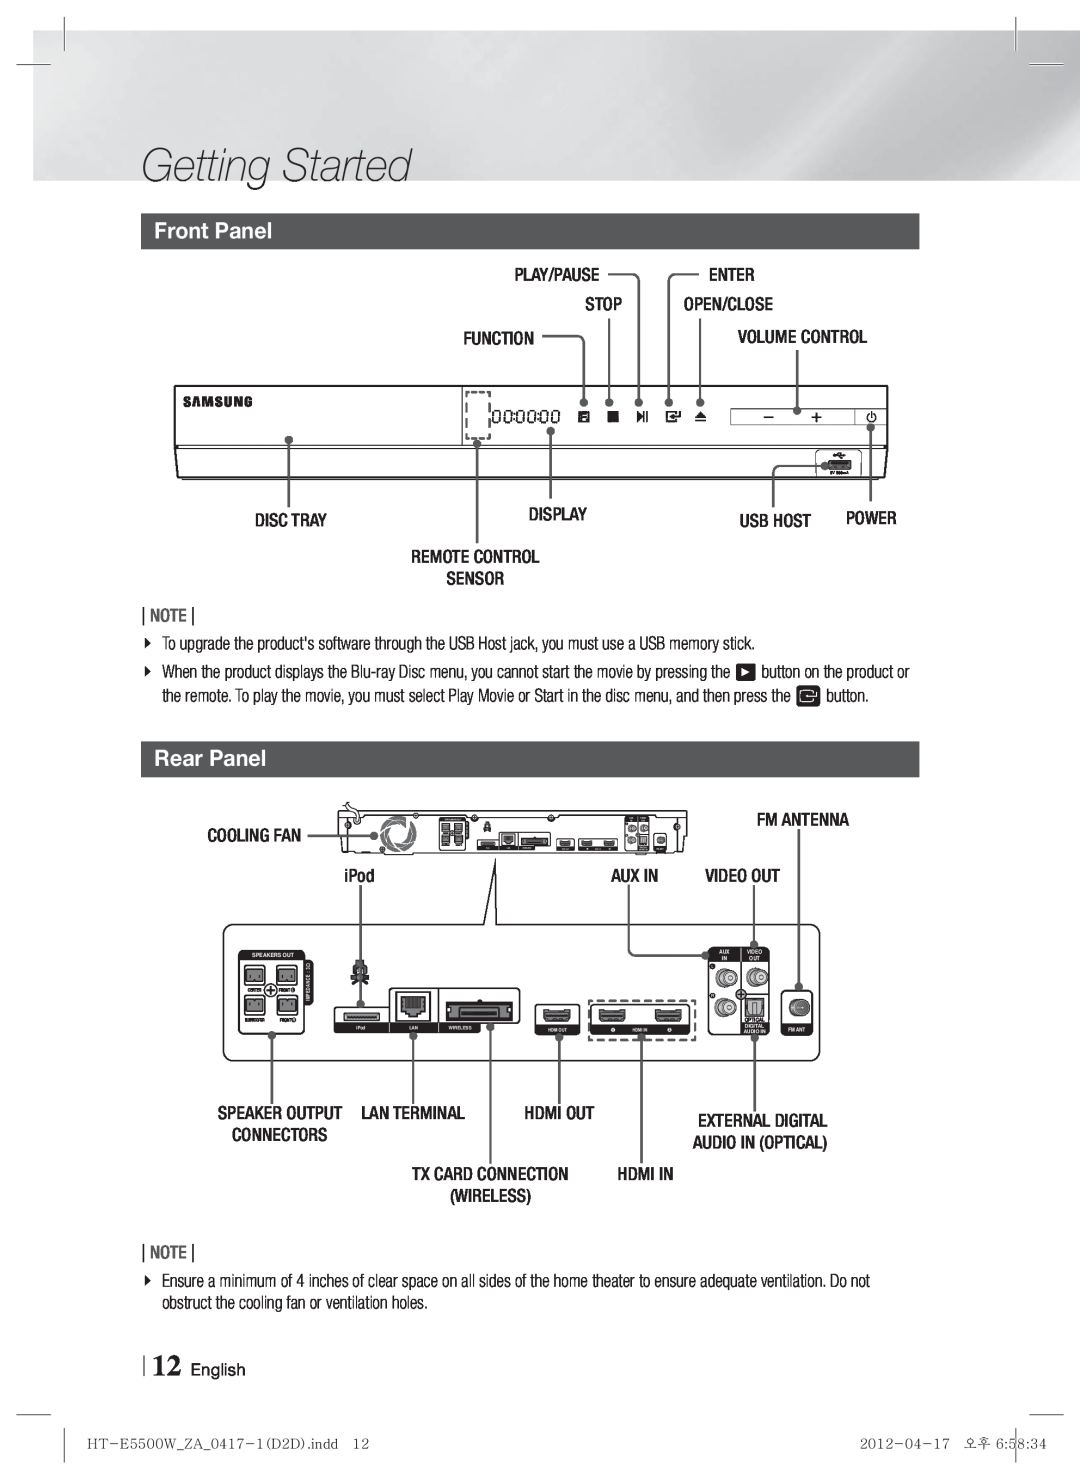 Samsung HT-E550 user manual Front Panel, Rear Panel, Getting Started, Note, iPod, Aux In 